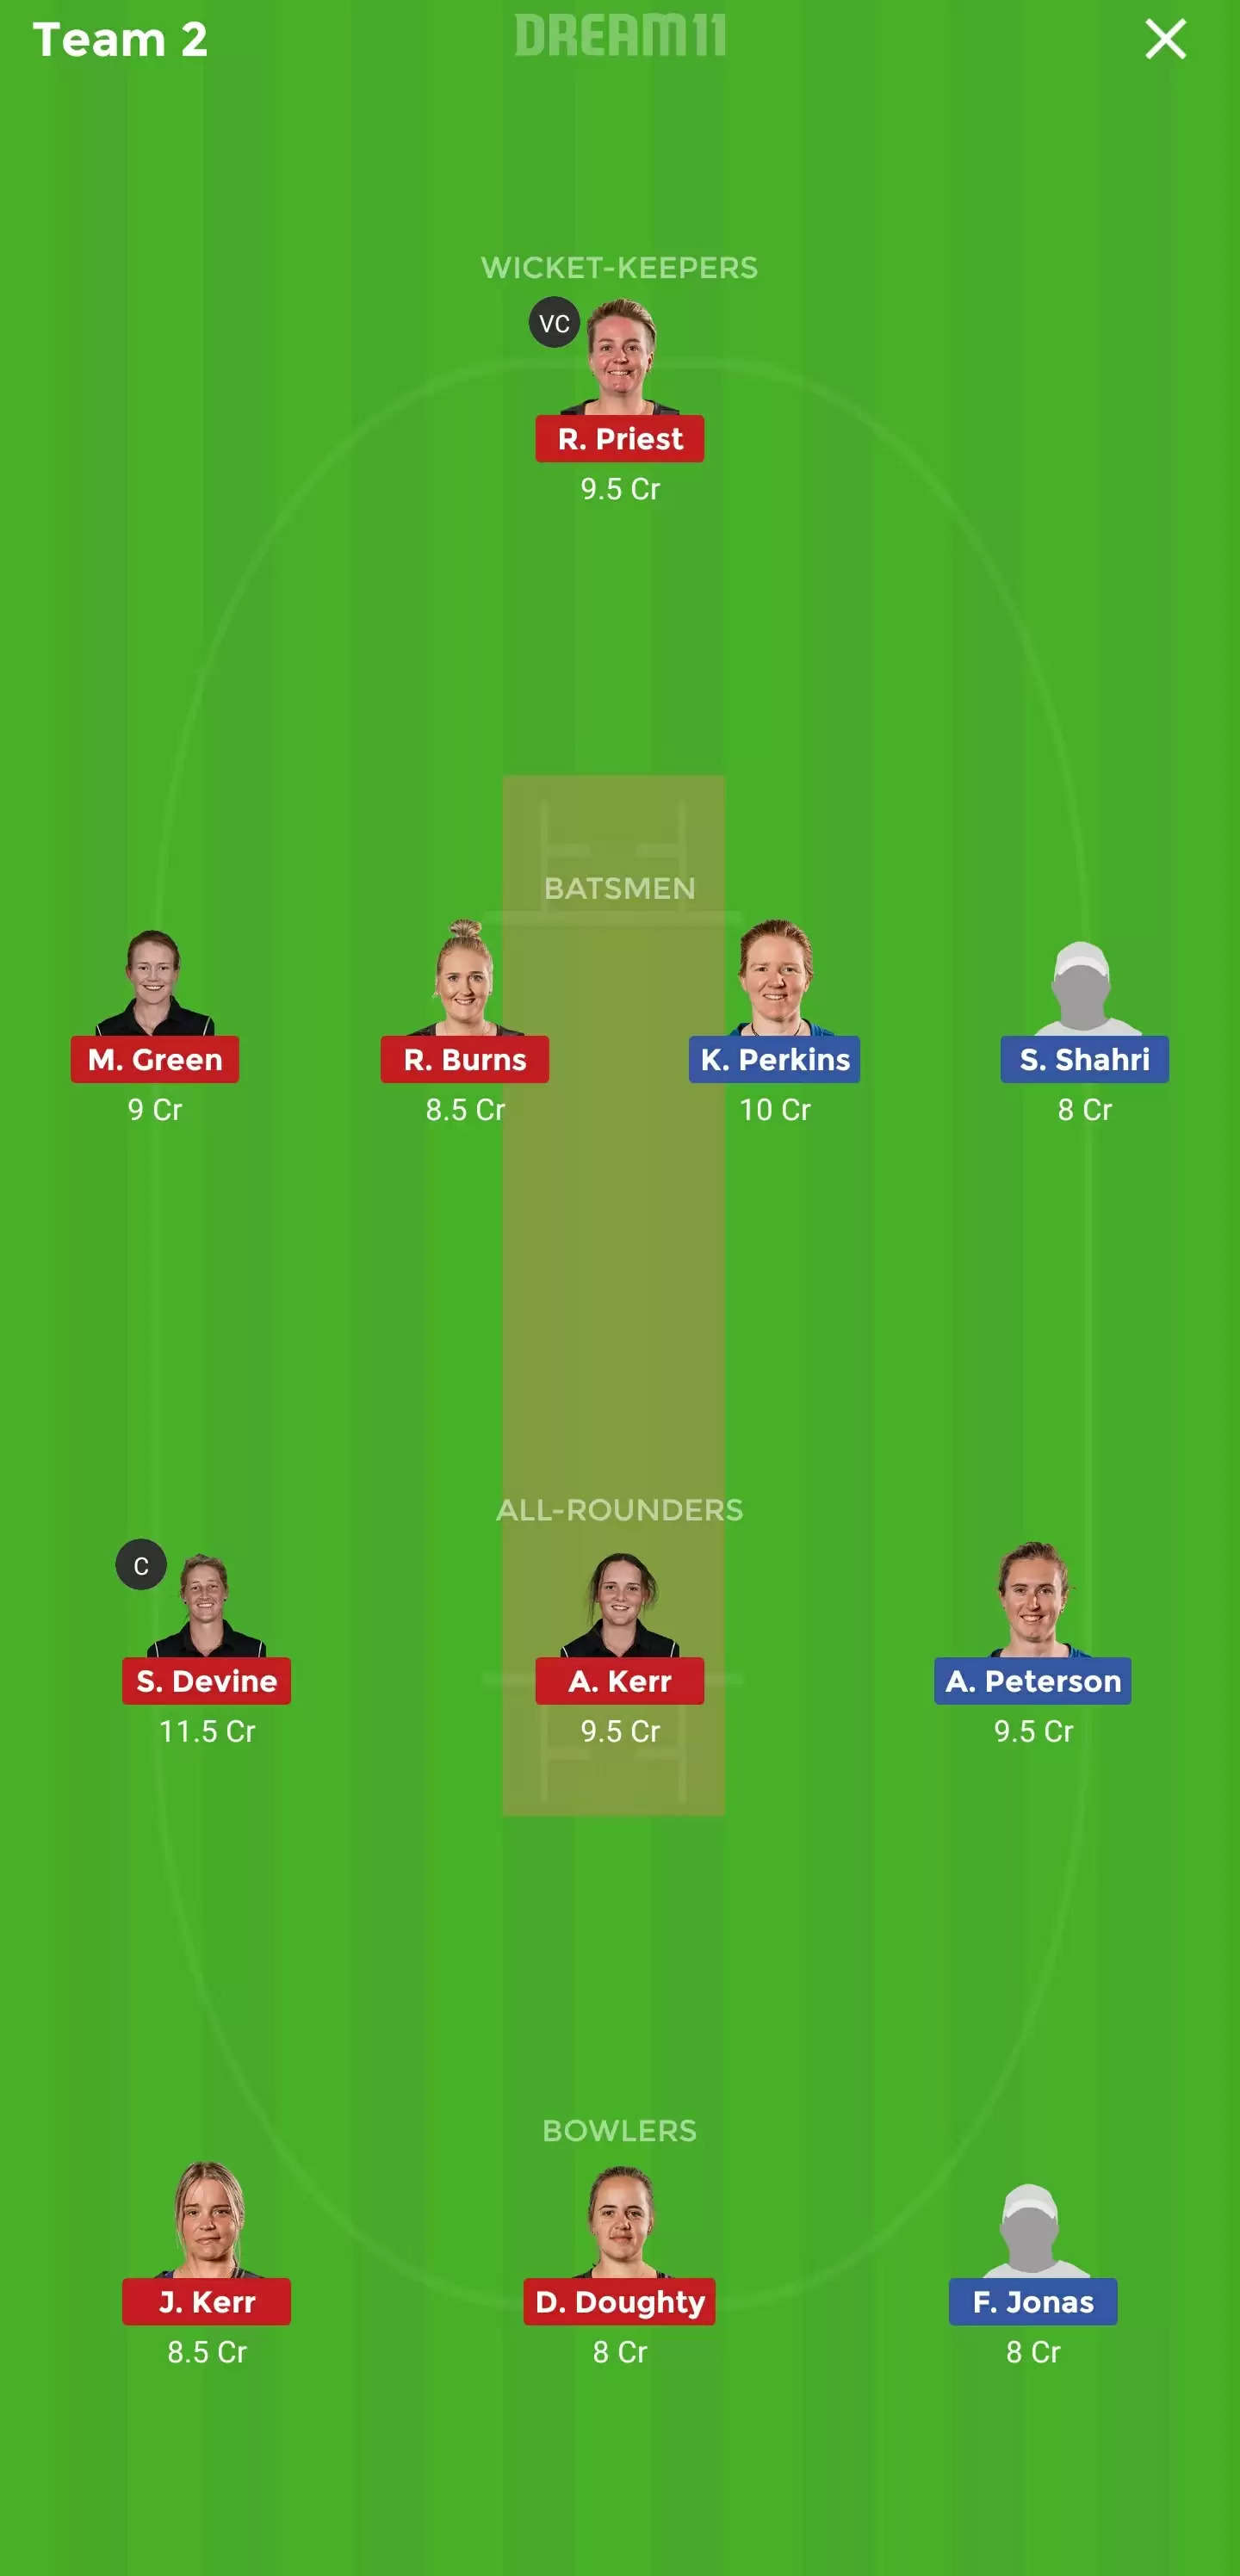 Women’s Super Smash League: WB-W vs AH-W Dream11 Prediction, Fantasy Cricket Tips, Playing XI, Team, Pitch Report and Weather Conditions